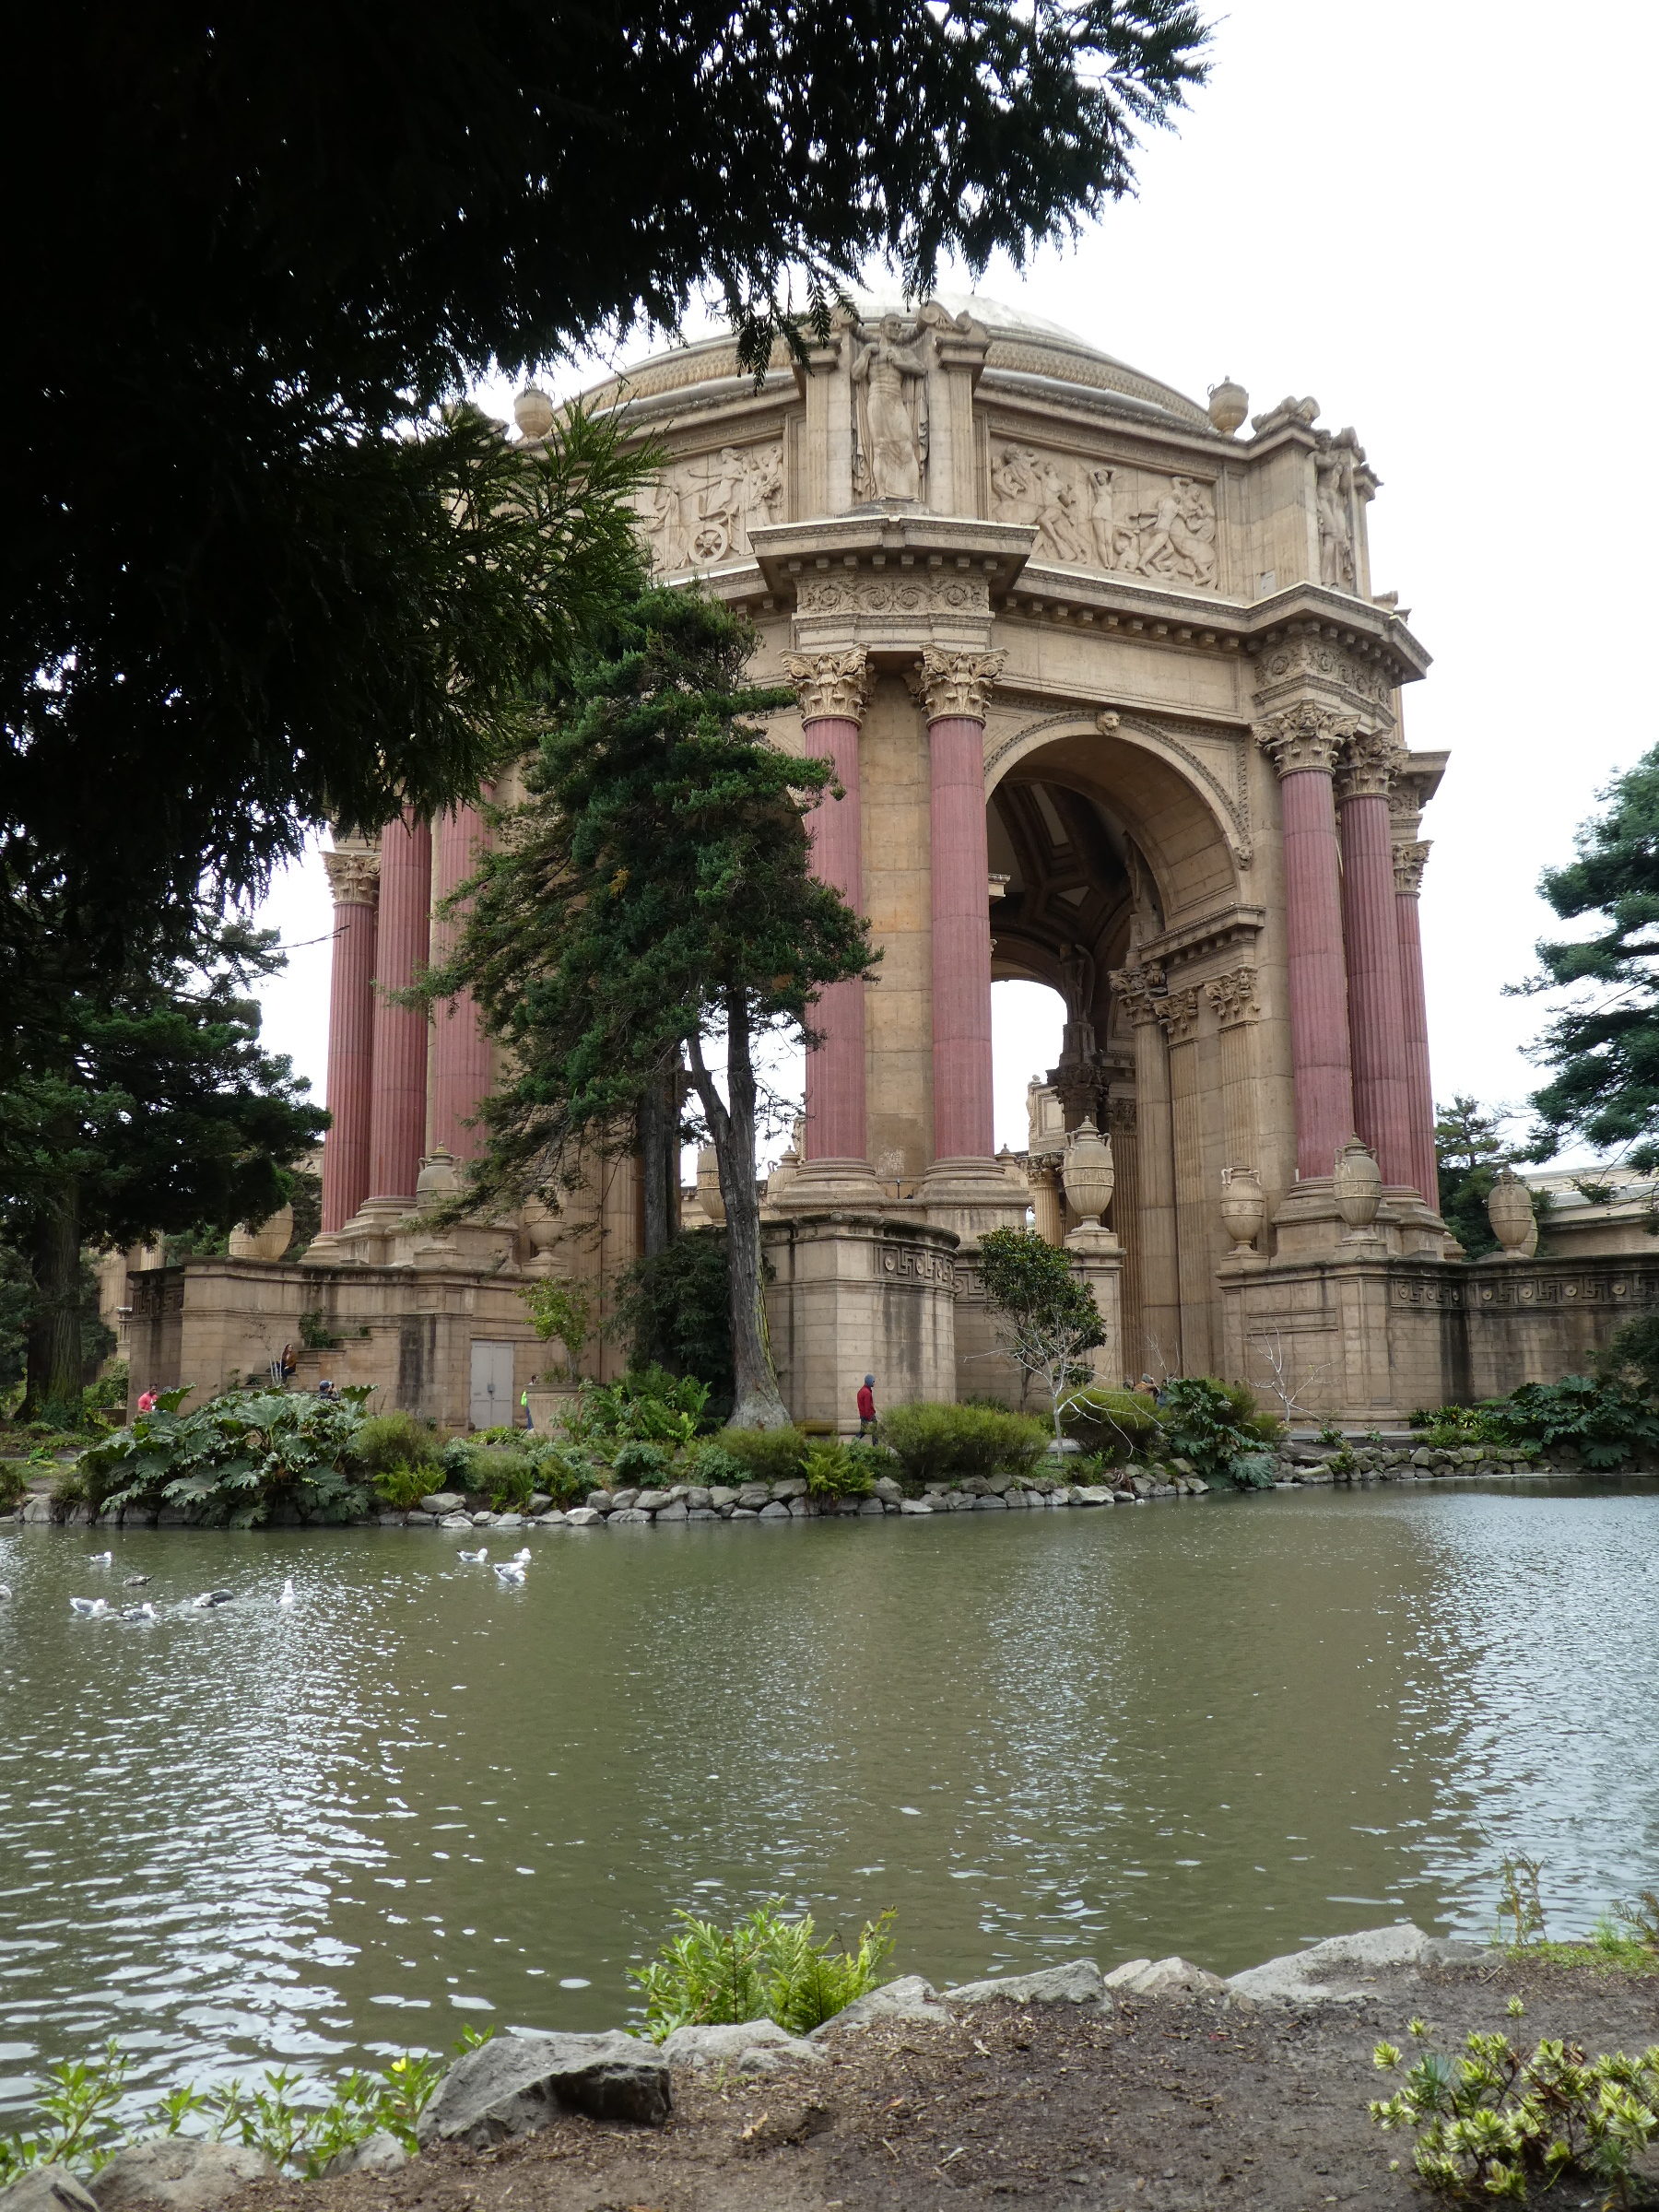 Palace of Fine Arts in San Francisco by hesaidorshesaid